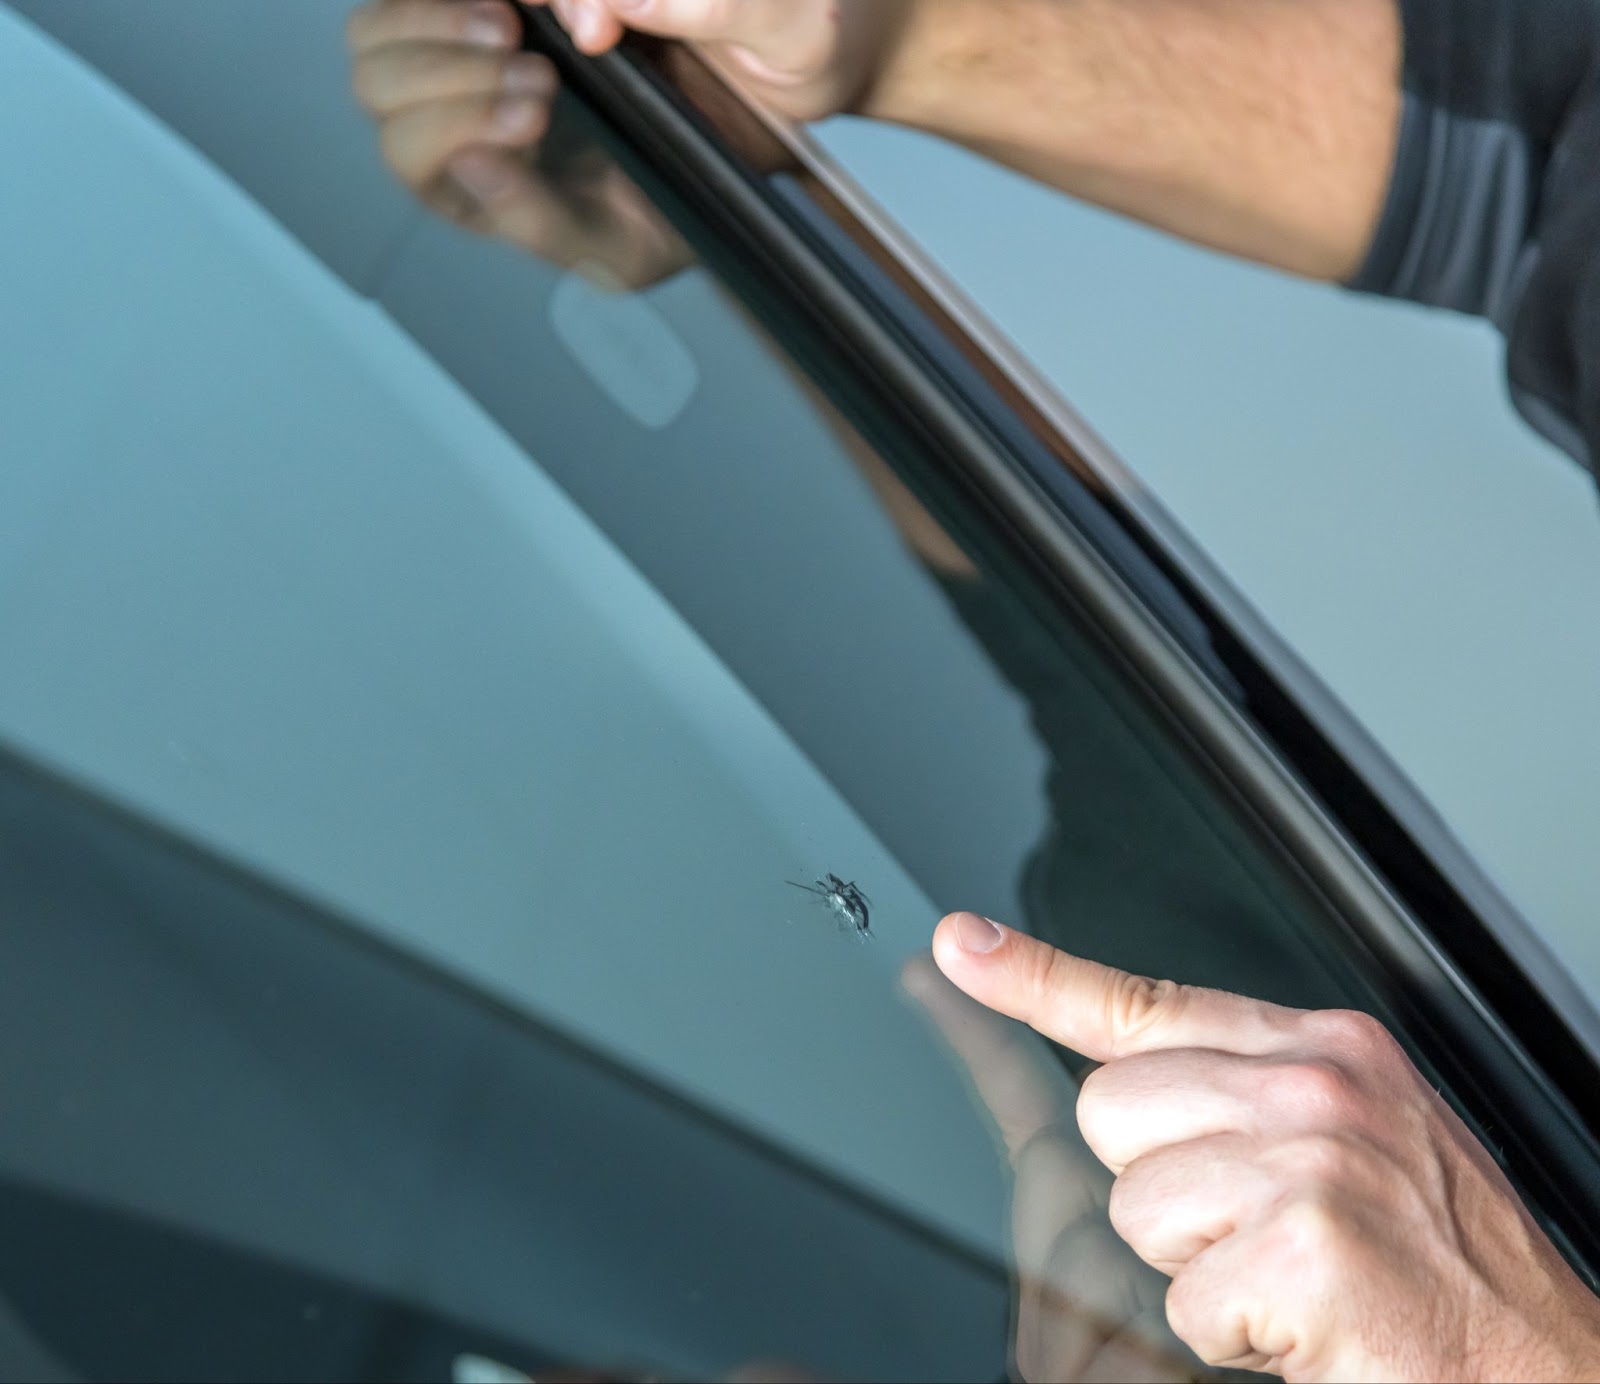 Should I Use My Insurance to Repair or Replace My Windshield?